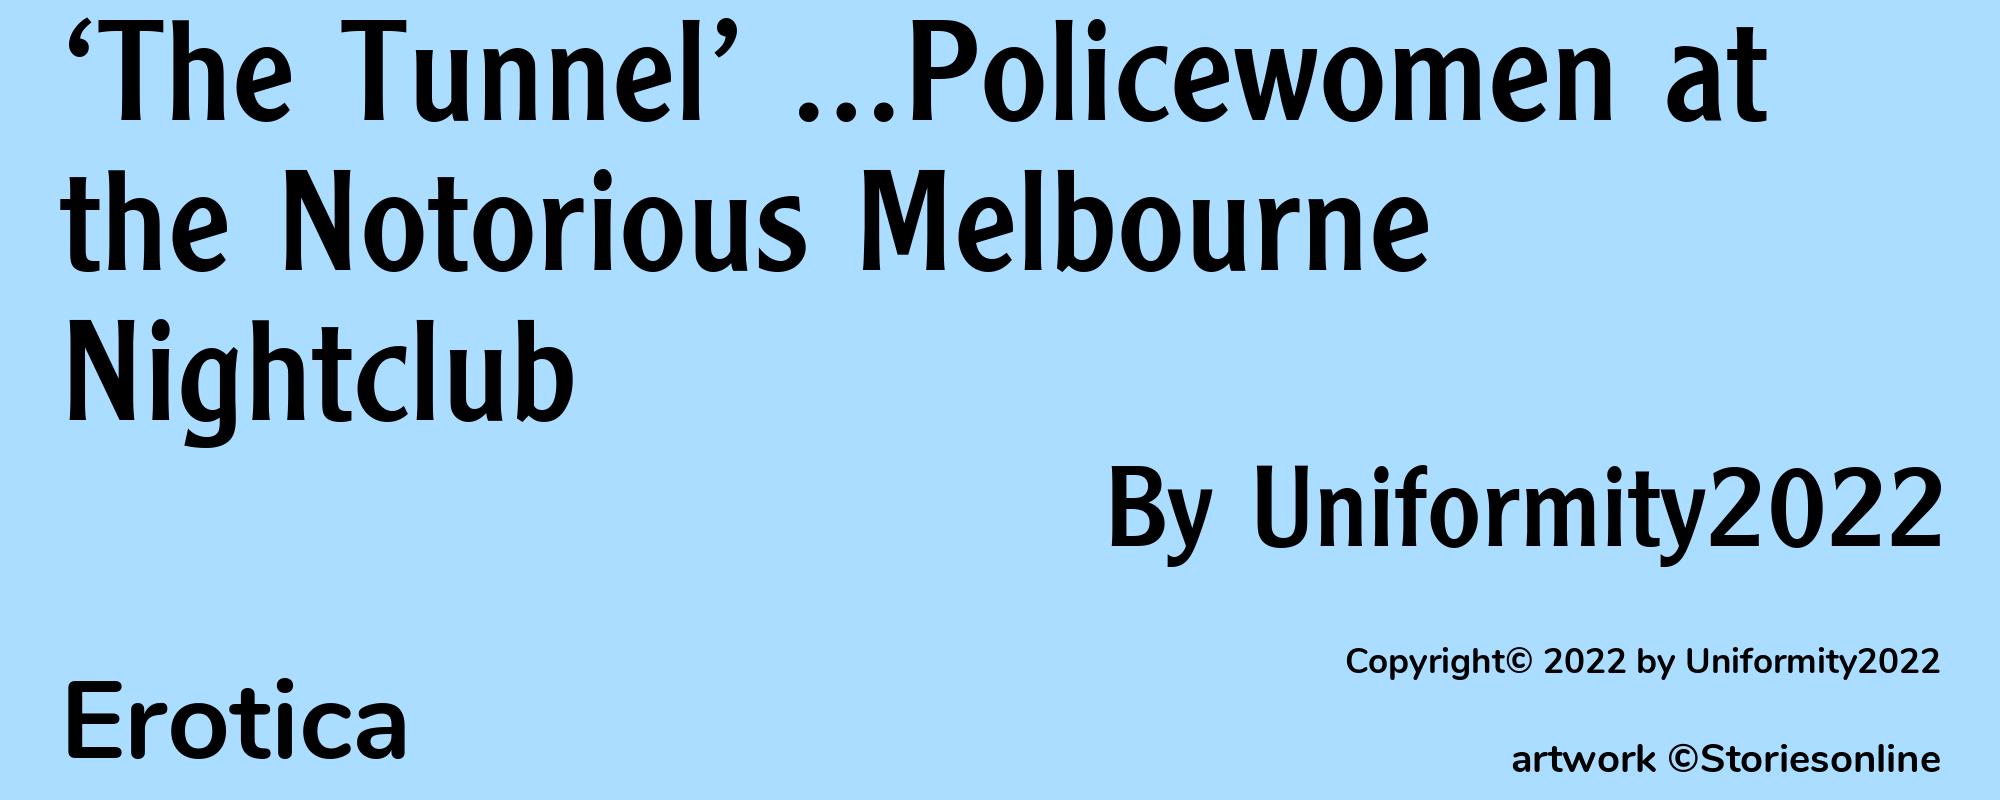 ‘The Tunnel’ …Policewomen at the Notorious Melbourne Nightclub - Cover